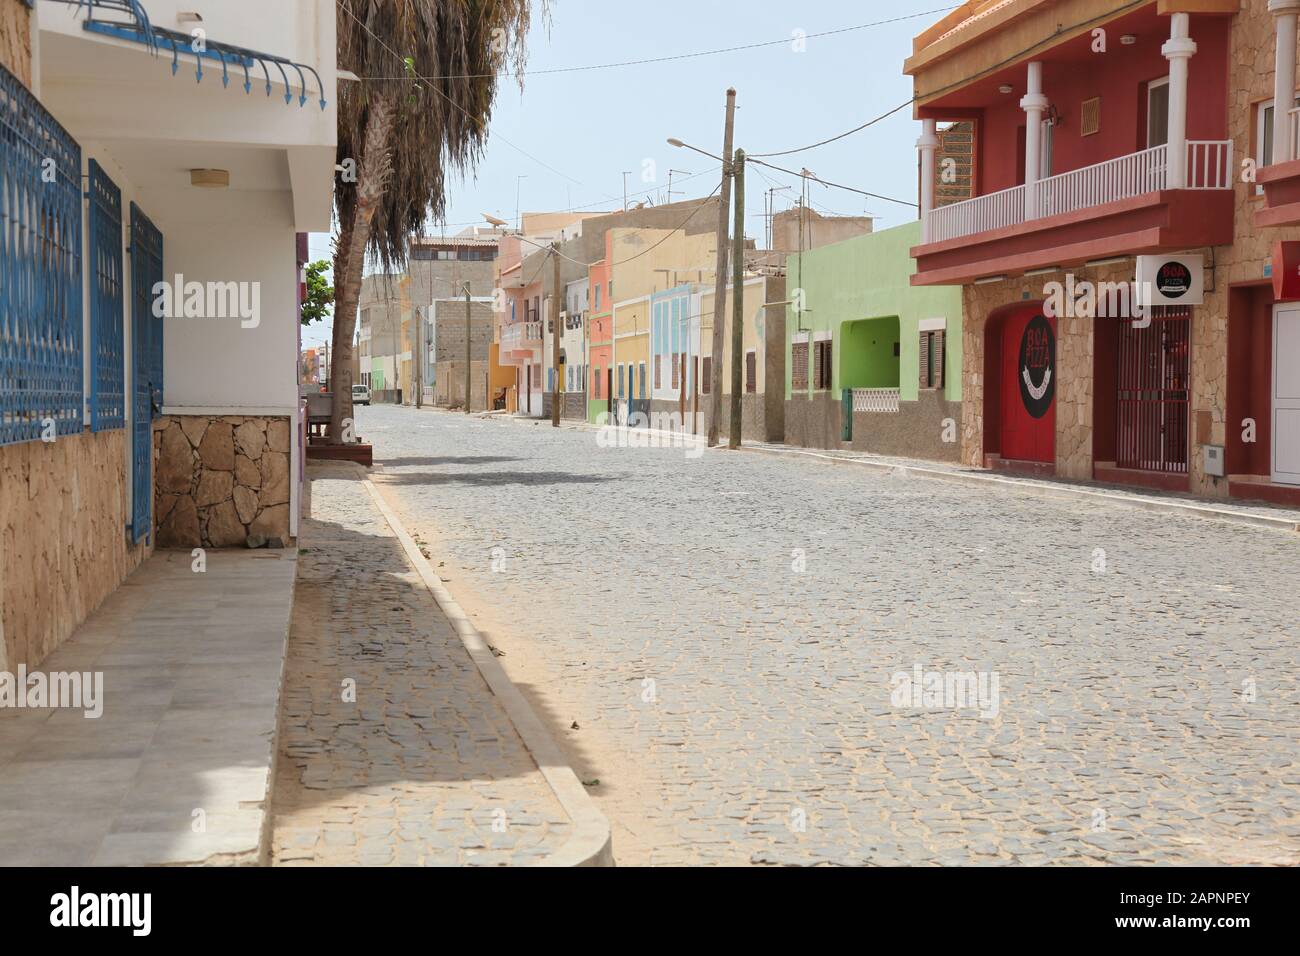 A deserted main street at siesta time with colourful shops and houses lining the roadside in Santa Maria, Sal, Cape Verde, Africa Stock Photo